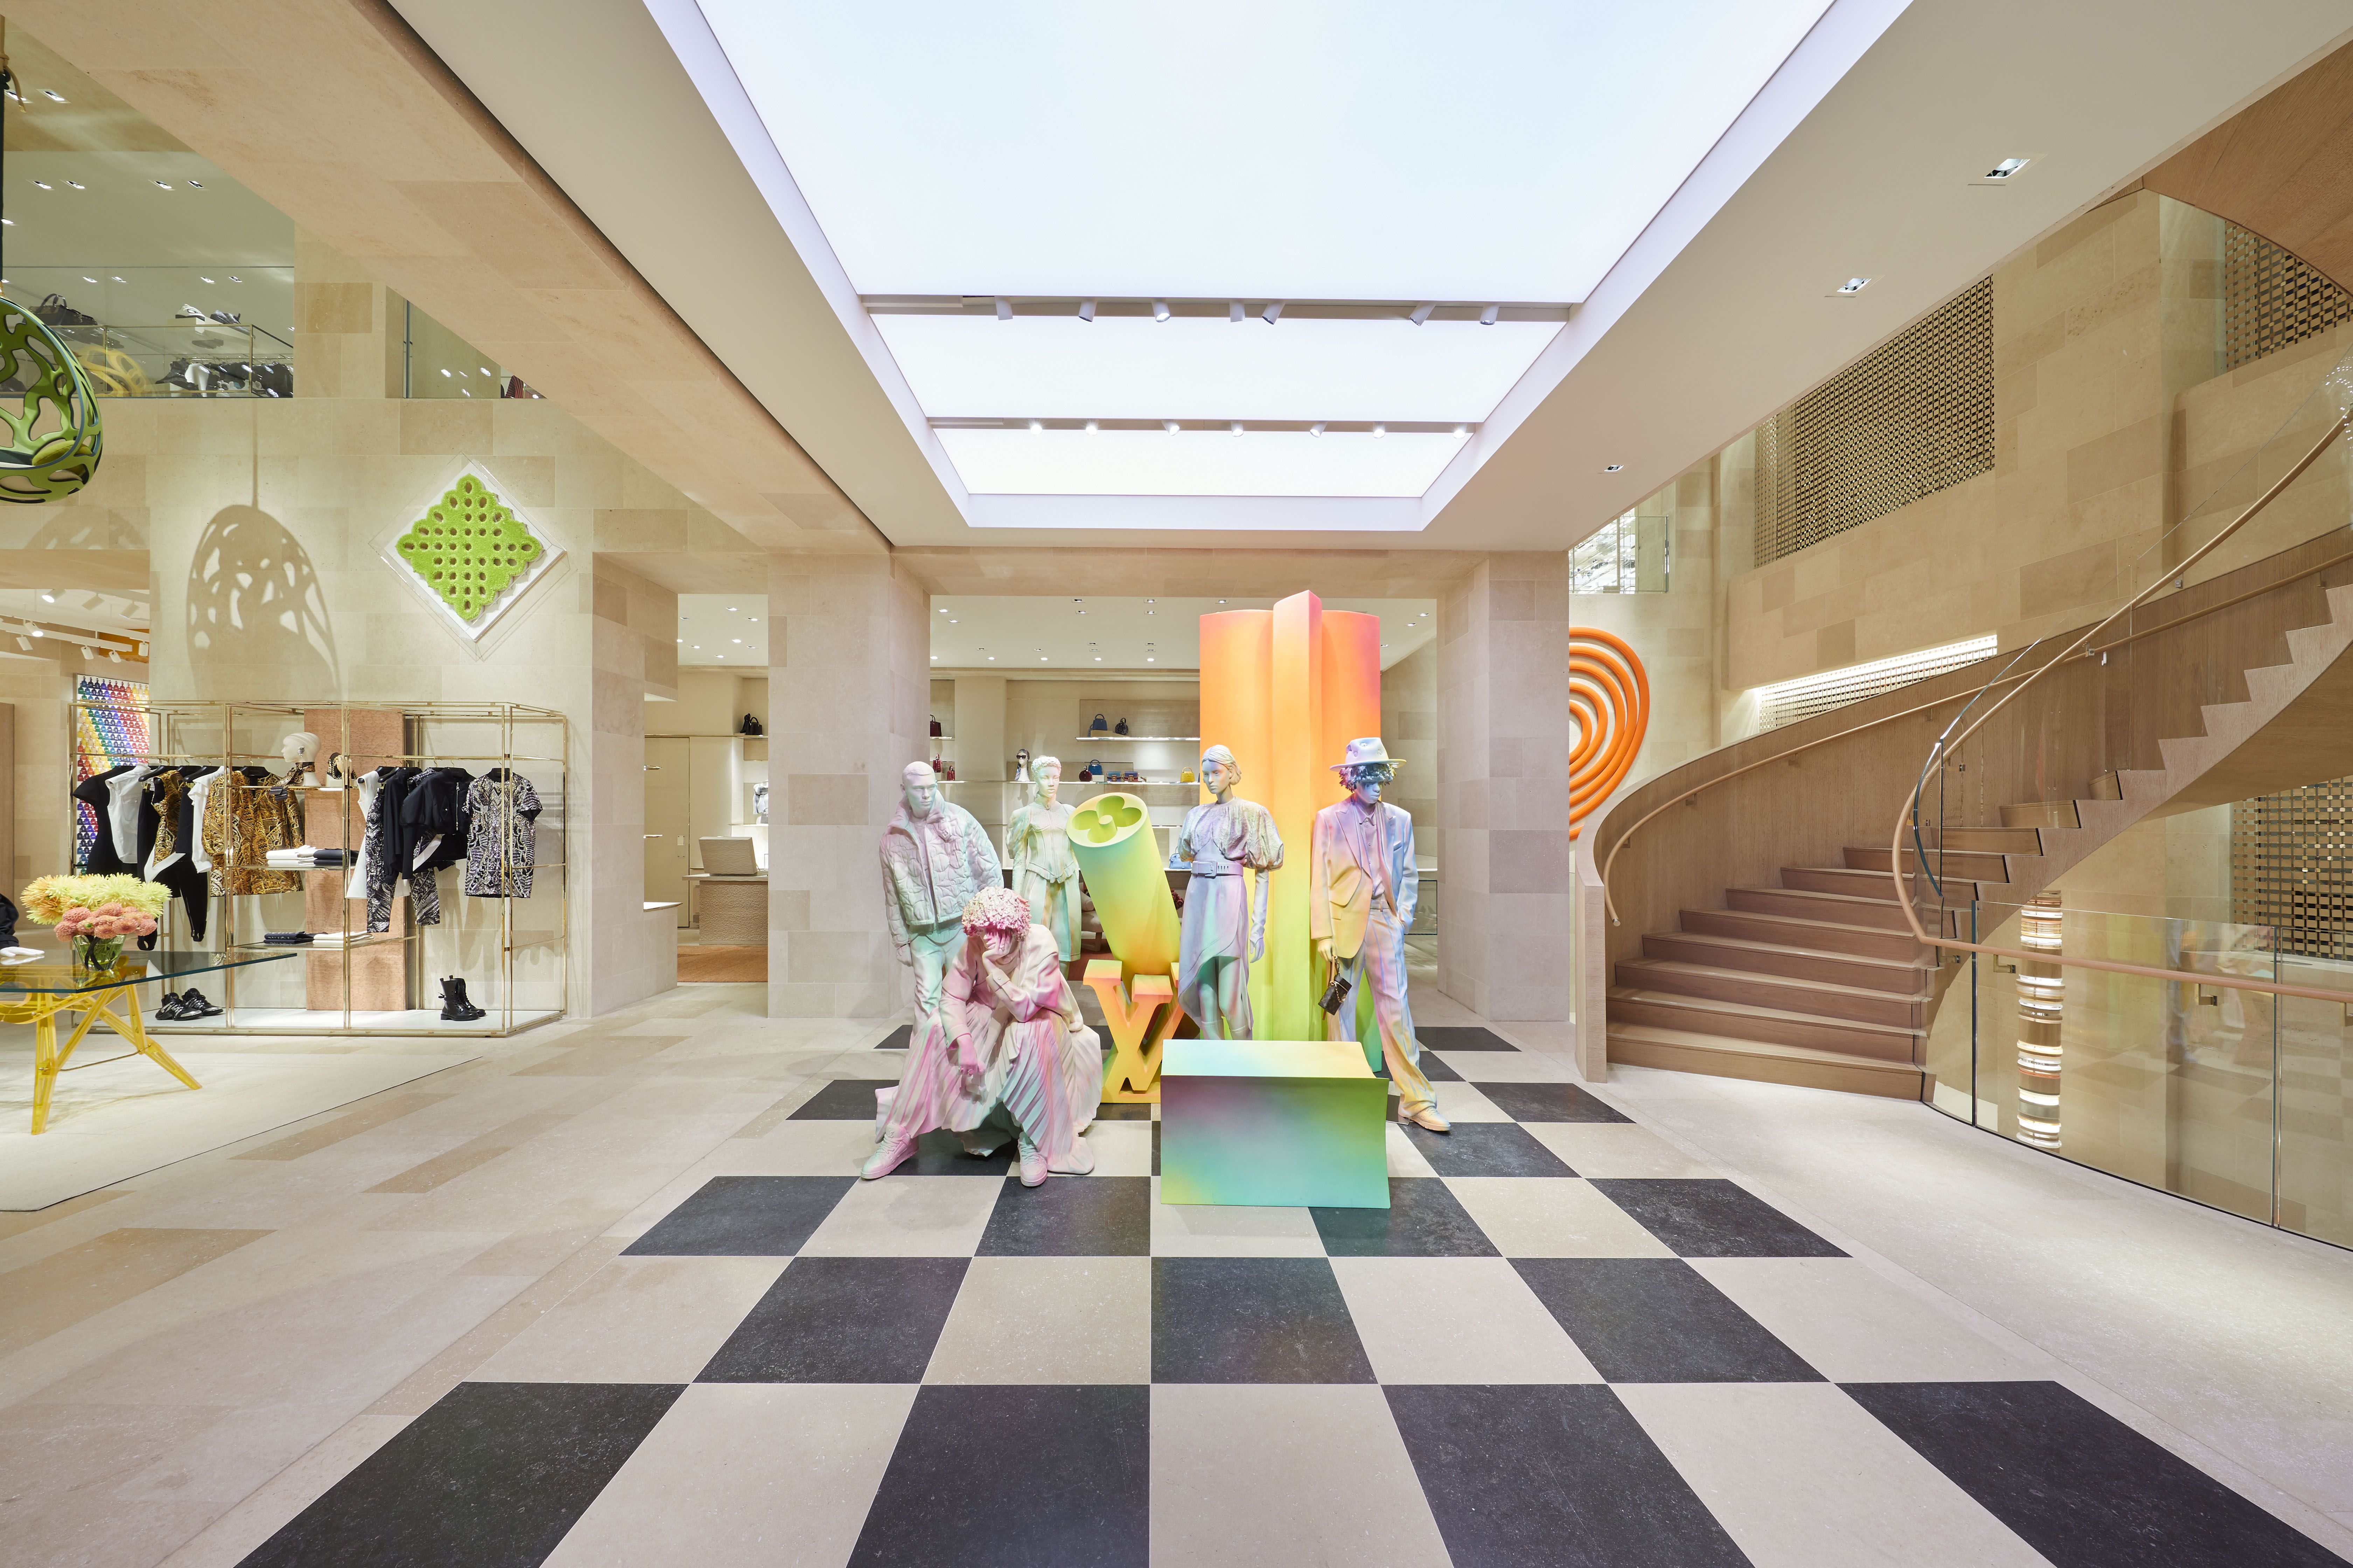 Louis Vuitton Unveils Renovated Flagship in Florence – WWD